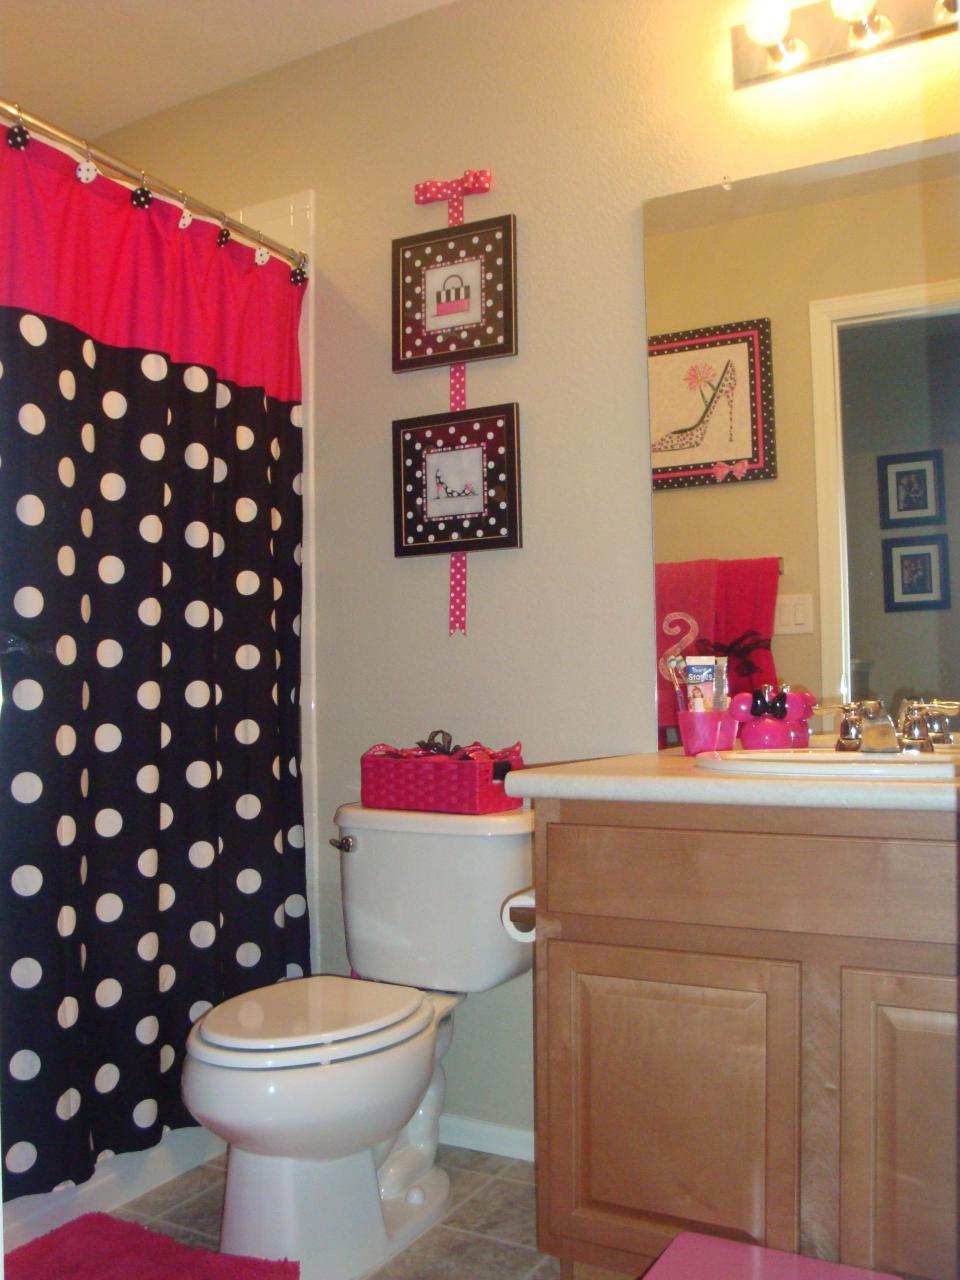 my daughters Minnie Mouse themed bathroom, with out going way to over